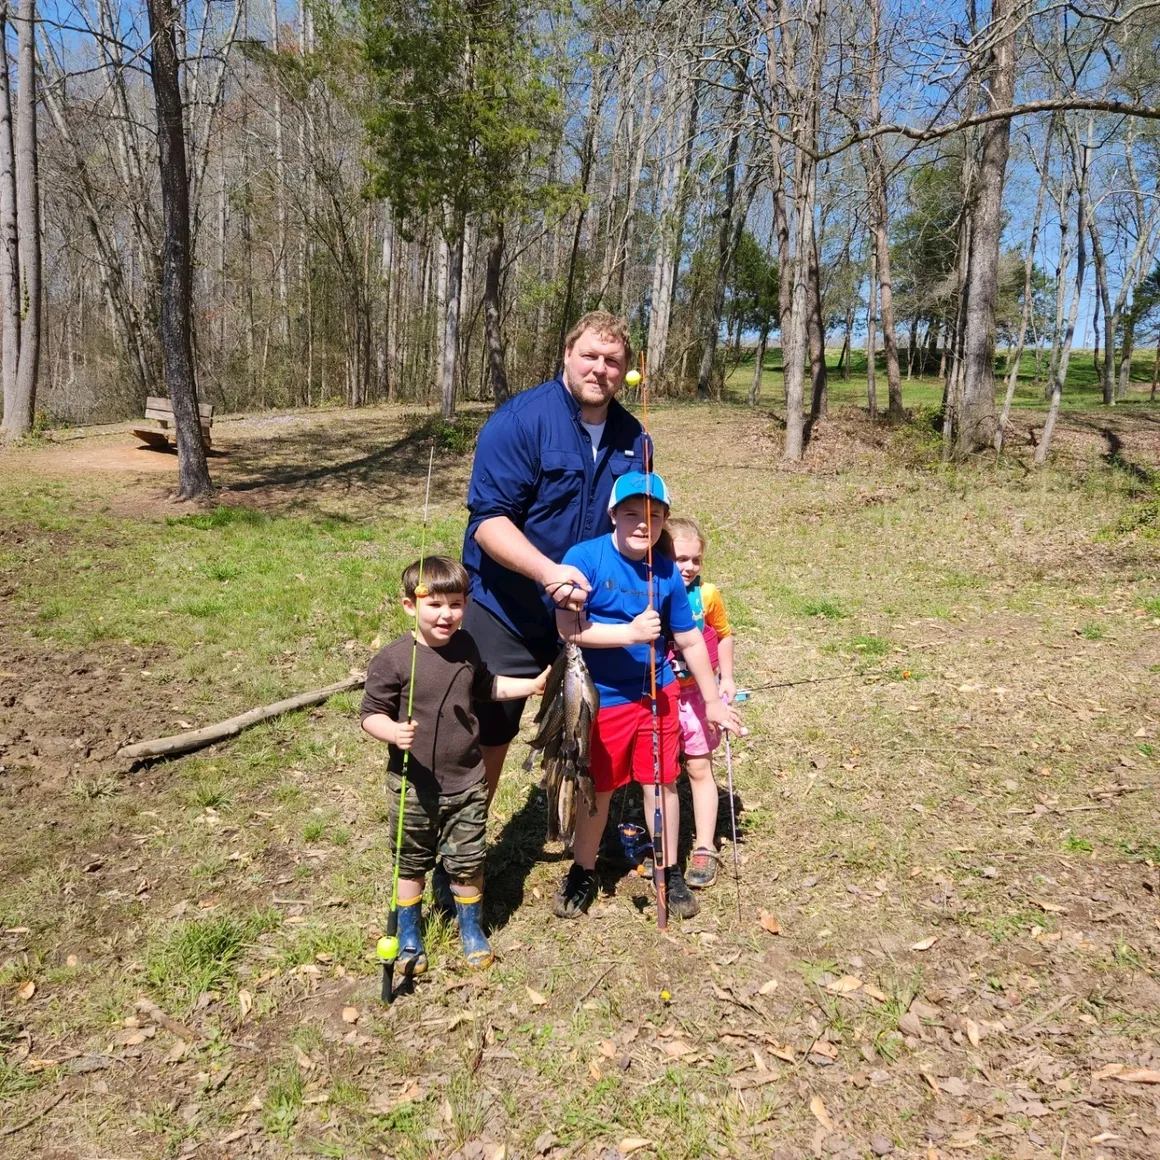 A man and his children in the woods